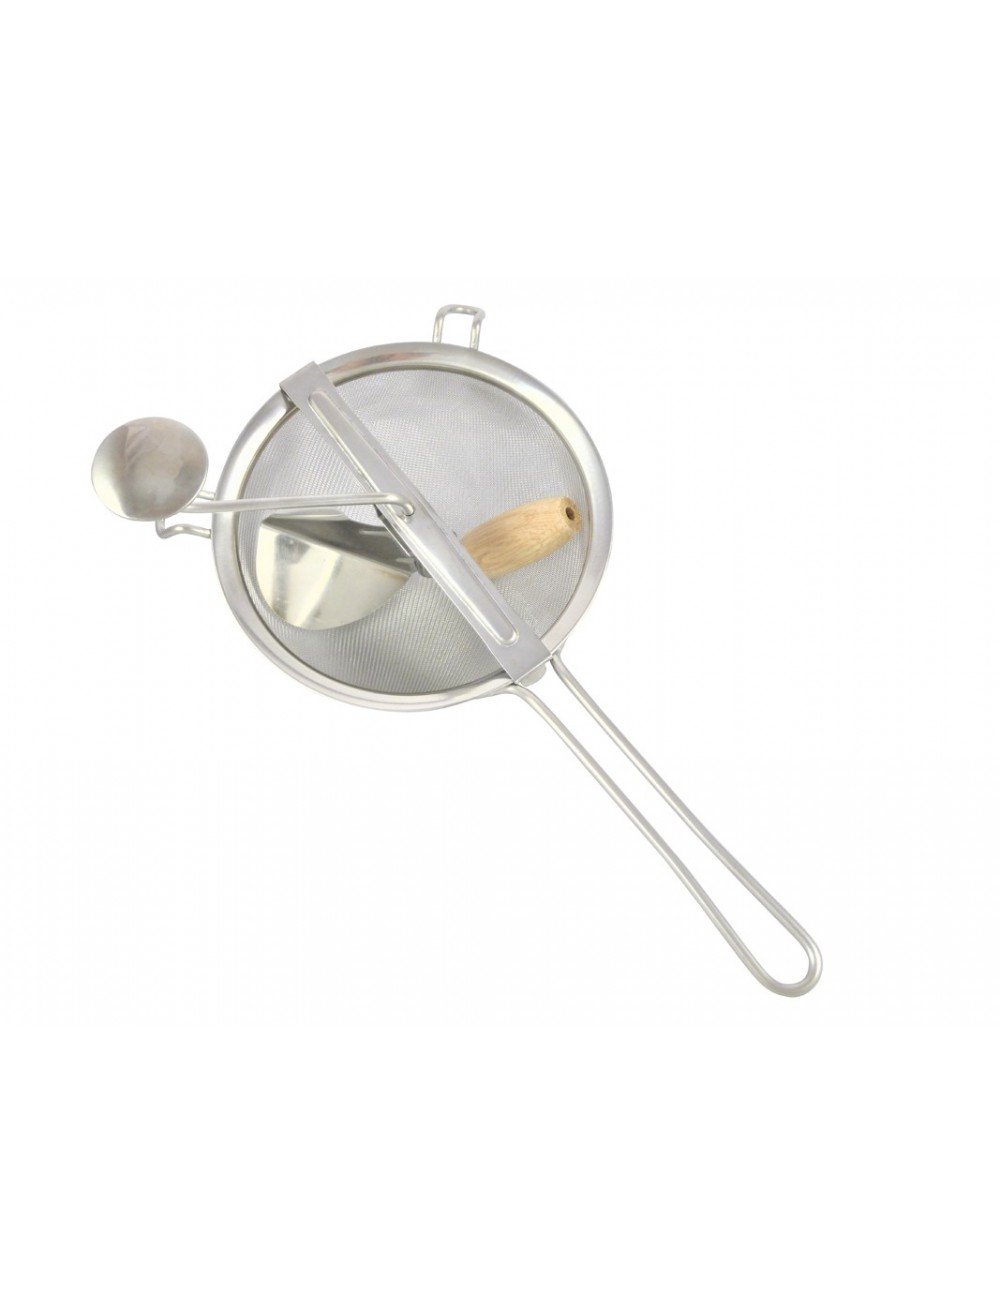 STAINLESS STEEL CURRANT STRAINER